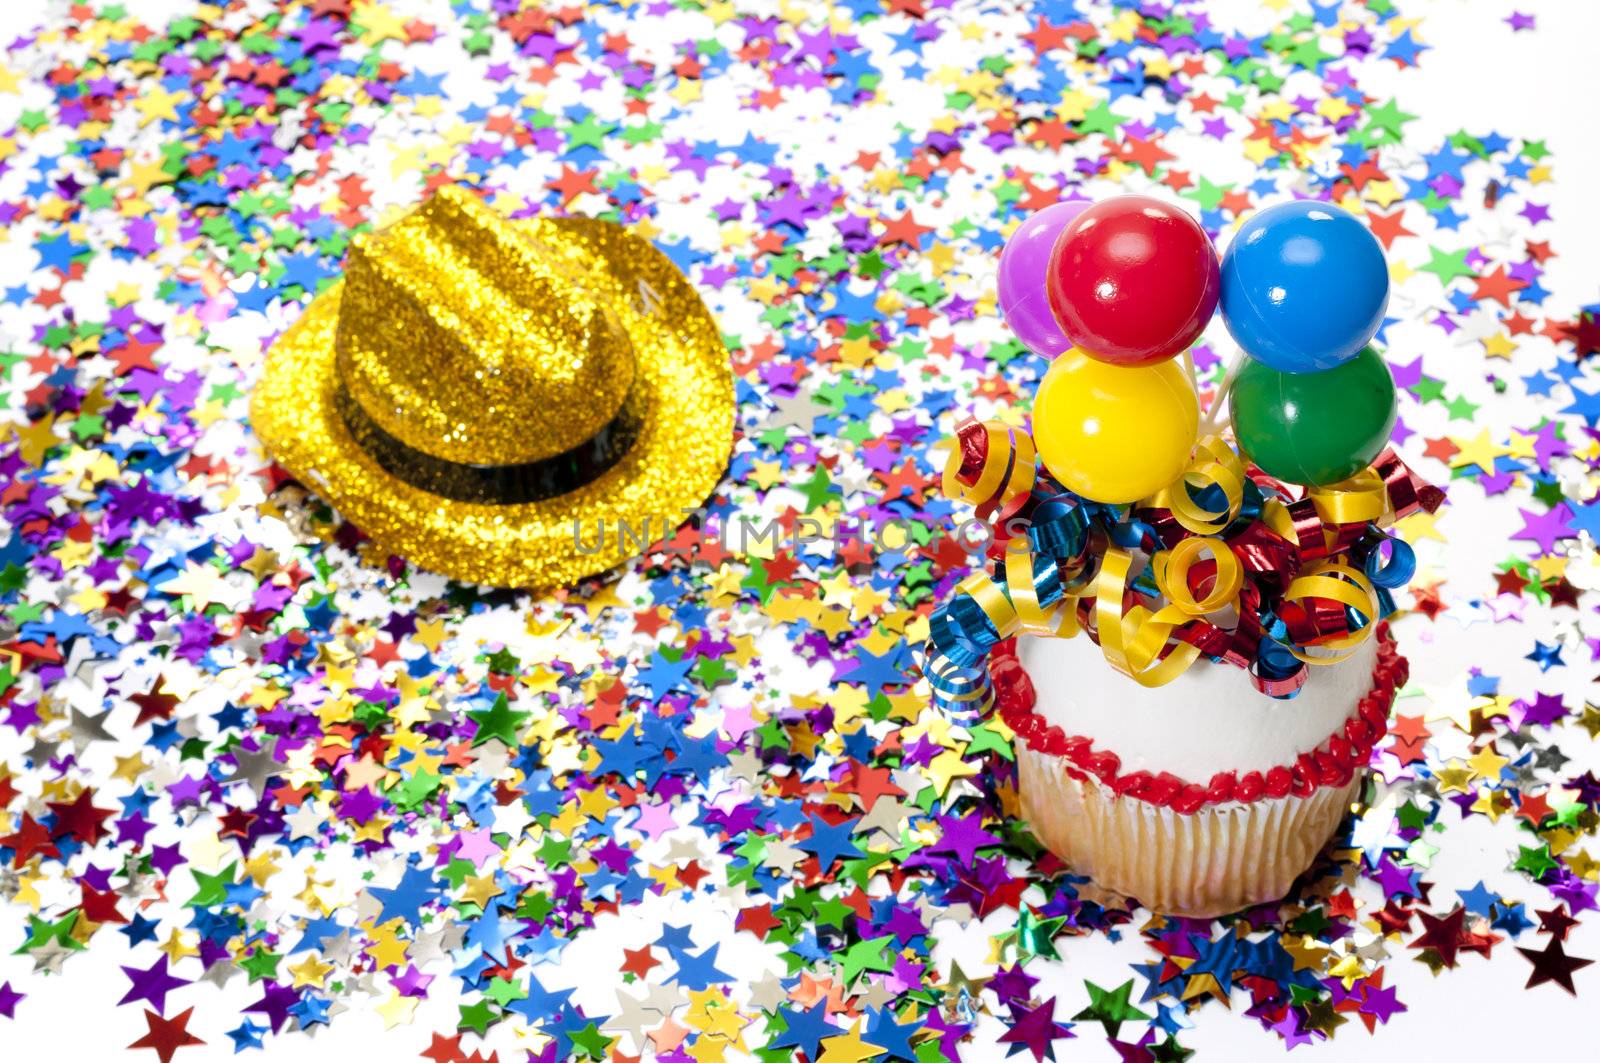 Decorated cupcake, confetti, and cowboy hat at party.